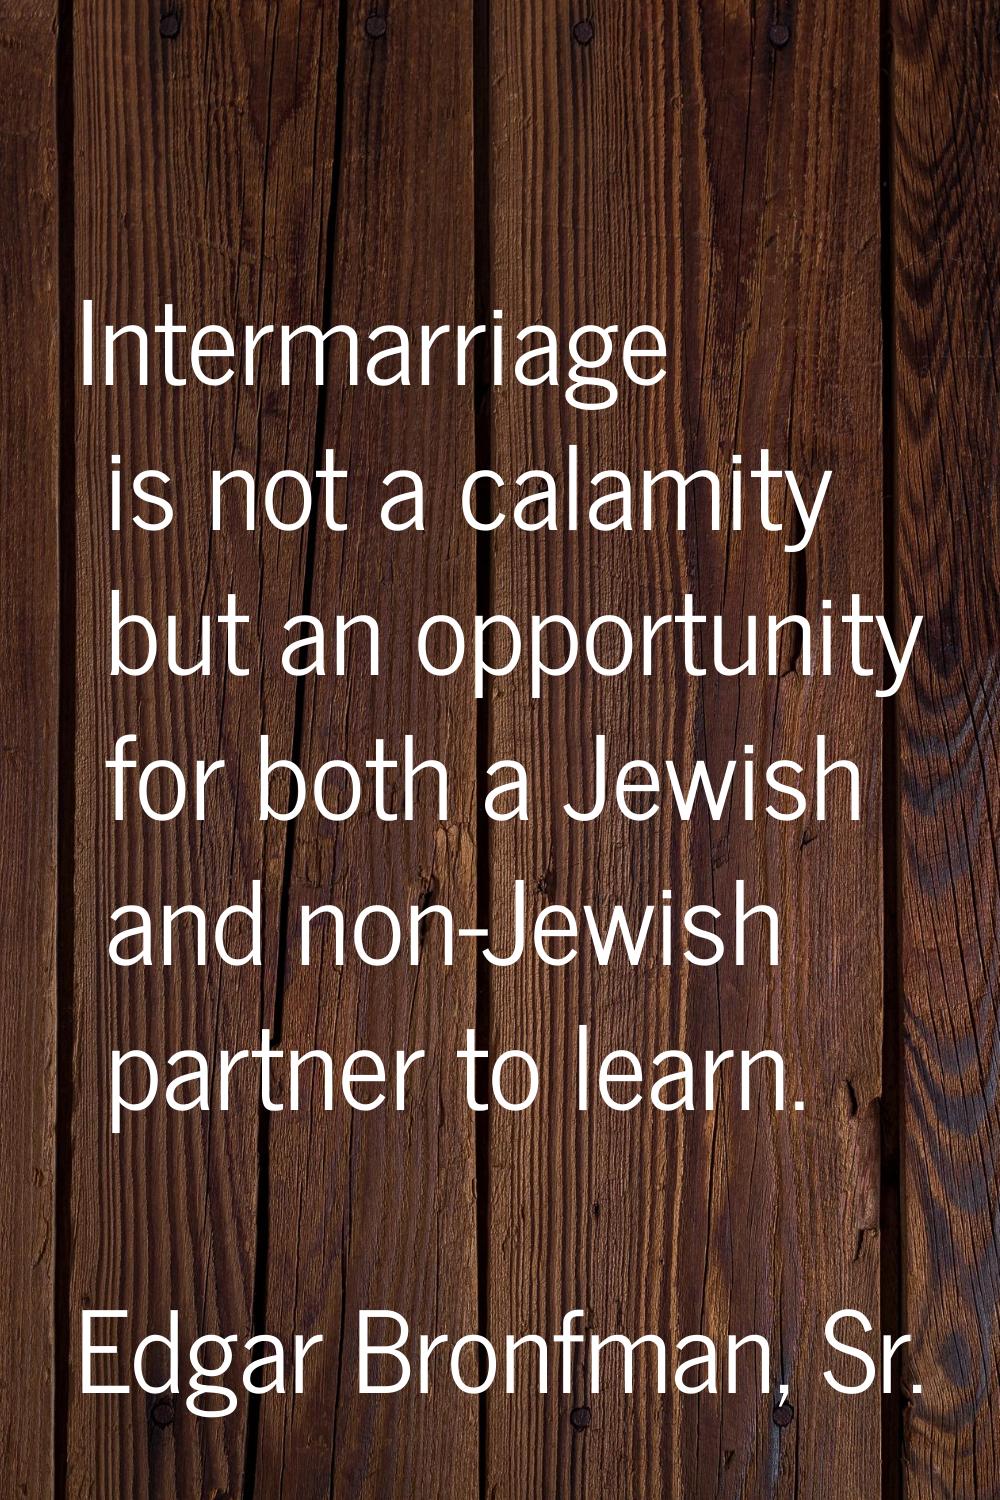 Intermarriage is not a calamity but an opportunity for both a Jewish and non-Jewish partner to lear